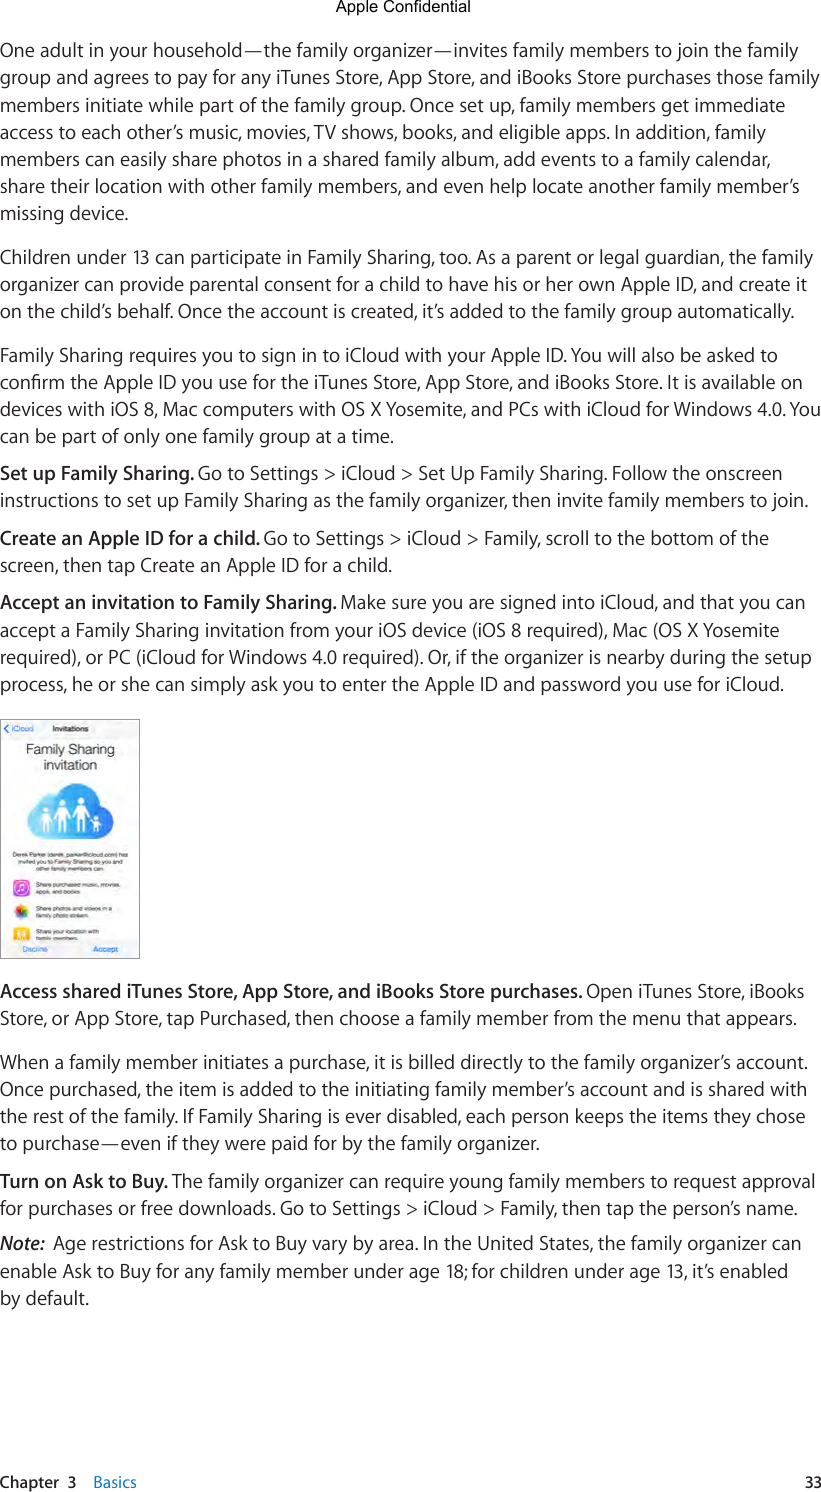 Chapter  3    Basics  33One adult in your household—the family organizer—invites family members to join the family group and agrees to pay for any iTunes Store, App Store, and iBooks Store purchases those family members initiate while part of the family group. Once set up, family members get immediate access to each other’s music, movies, TV shows, books, and eligible apps. In addition, family members can easily share photos in a shared family album, add events to a family calendar, share their location with other family members, and even help locate another family member’s missing device.Children under 13 can participate in Family Sharing, too. As a parent or legal guardian, the family organizer can provide parental consent for a child to have his or her own Apple ID, and create it on the child’s behalf. Once the account is created, it’s added to the family group automatically.Family Sharing requires you to sign in to iCloud with your Apple ID. You will also be asked to conrmtheAppleIDyouusefortheiTunesStore,AppStore,andiBooksStore.Itisavailableondevices with iOS 8, Mac computers with OS X Yosemite, and PCs with iCloud for Windows 4.0. You can be part of only one family group at a time.Set up Family Sharing. Go to Settings &gt; iCloud &gt; Set Up Family Sharing. Follow the onscreen instructions to set up Family Sharing as the family organizer, then invite family members to join.Create an Apple ID for a child. Go to Settings &gt; iCloud &gt; Family, scroll to the bottom of the screen, then tap Create an Apple ID for a child.Accept an invitation to Family Sharing. Make sure you are signed into iCloud, and that you can accept a Family Sharing invitation from your iOS device (iOS 8 required), Mac (OS X Yosemite required), or PC (iCloud for Windows 4.0 required). Or, if the organizer is nearby during the setup process, he or she can simply ask you to enter the Apple ID and password you use for iCloud.Access shared iTunes Store, App Store, and iBooks Store purchases. Open iTunes Store, iBooks Store, or App Store, tap Purchased, then choose a family member from the menu that appears.When a family member initiates a purchase, it is billed directly to the family organizer’s account. Once purchased, the item is added to the initiating family member’s account and is shared with the rest of the family. If Family Sharing is ever disabled, each person keeps the items they chose to purchase—even if they were paid for by the family organizer.Turn on Ask to Buy. The family organizer can require young family members to request approval for purchases or free downloads. Go to Settings &gt; iCloud &gt; Family, then tap the person’s name.Note:  Age restrictions for Ask to Buy vary by area. In the United States, the family organizer can enable Ask to Buy for any family member under age 18; for children under age 13, it’s enabled by default.Apple Confidential